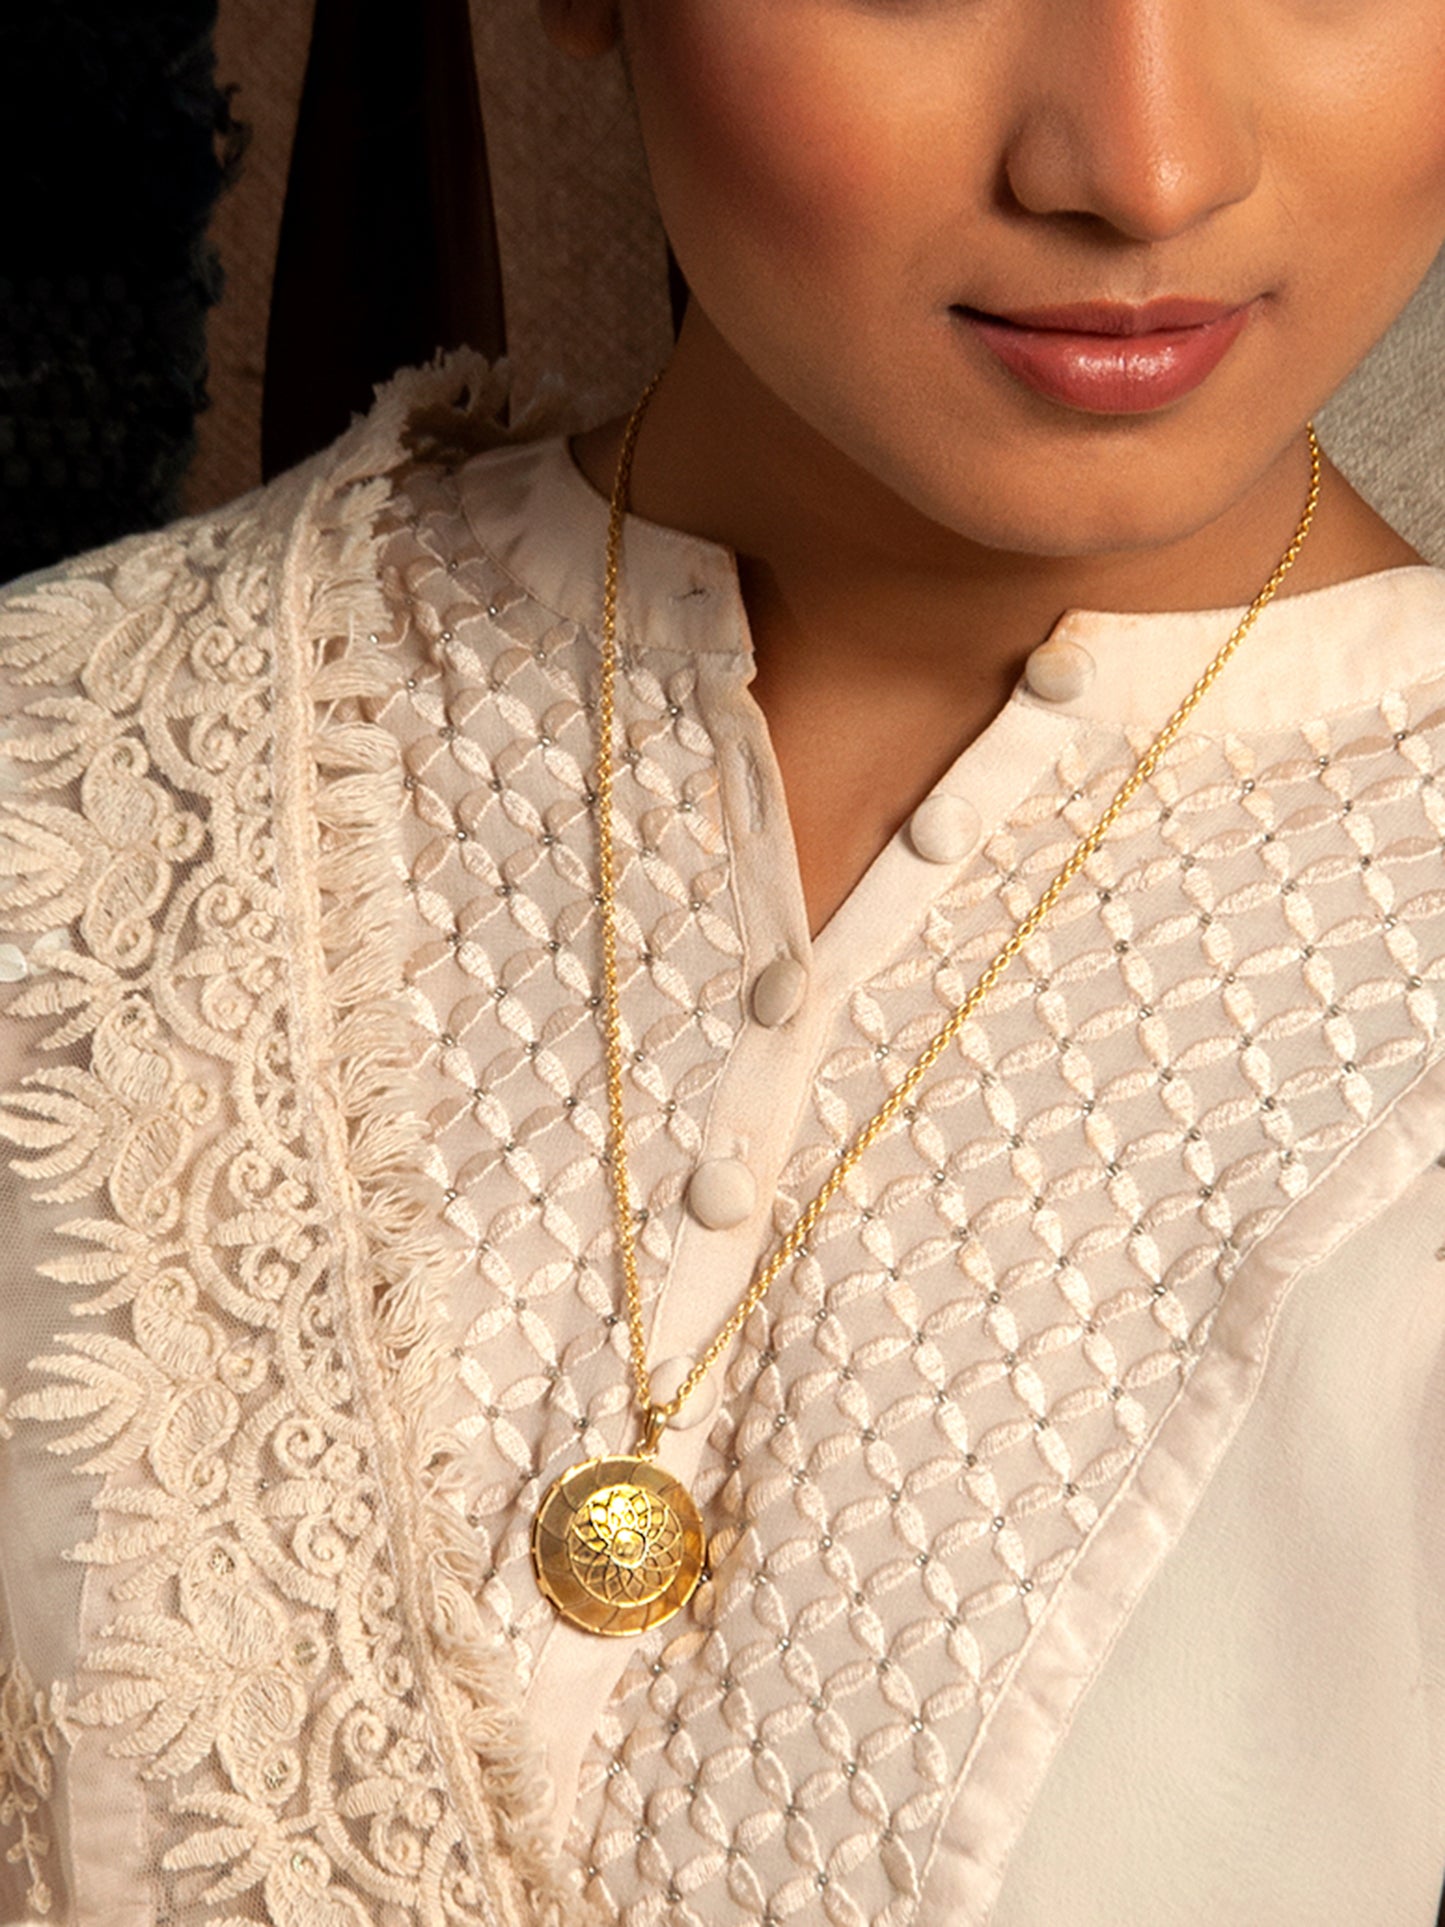 Golden Glow: 925 Silver Modern Everyday Wear Gold Plated Necklace